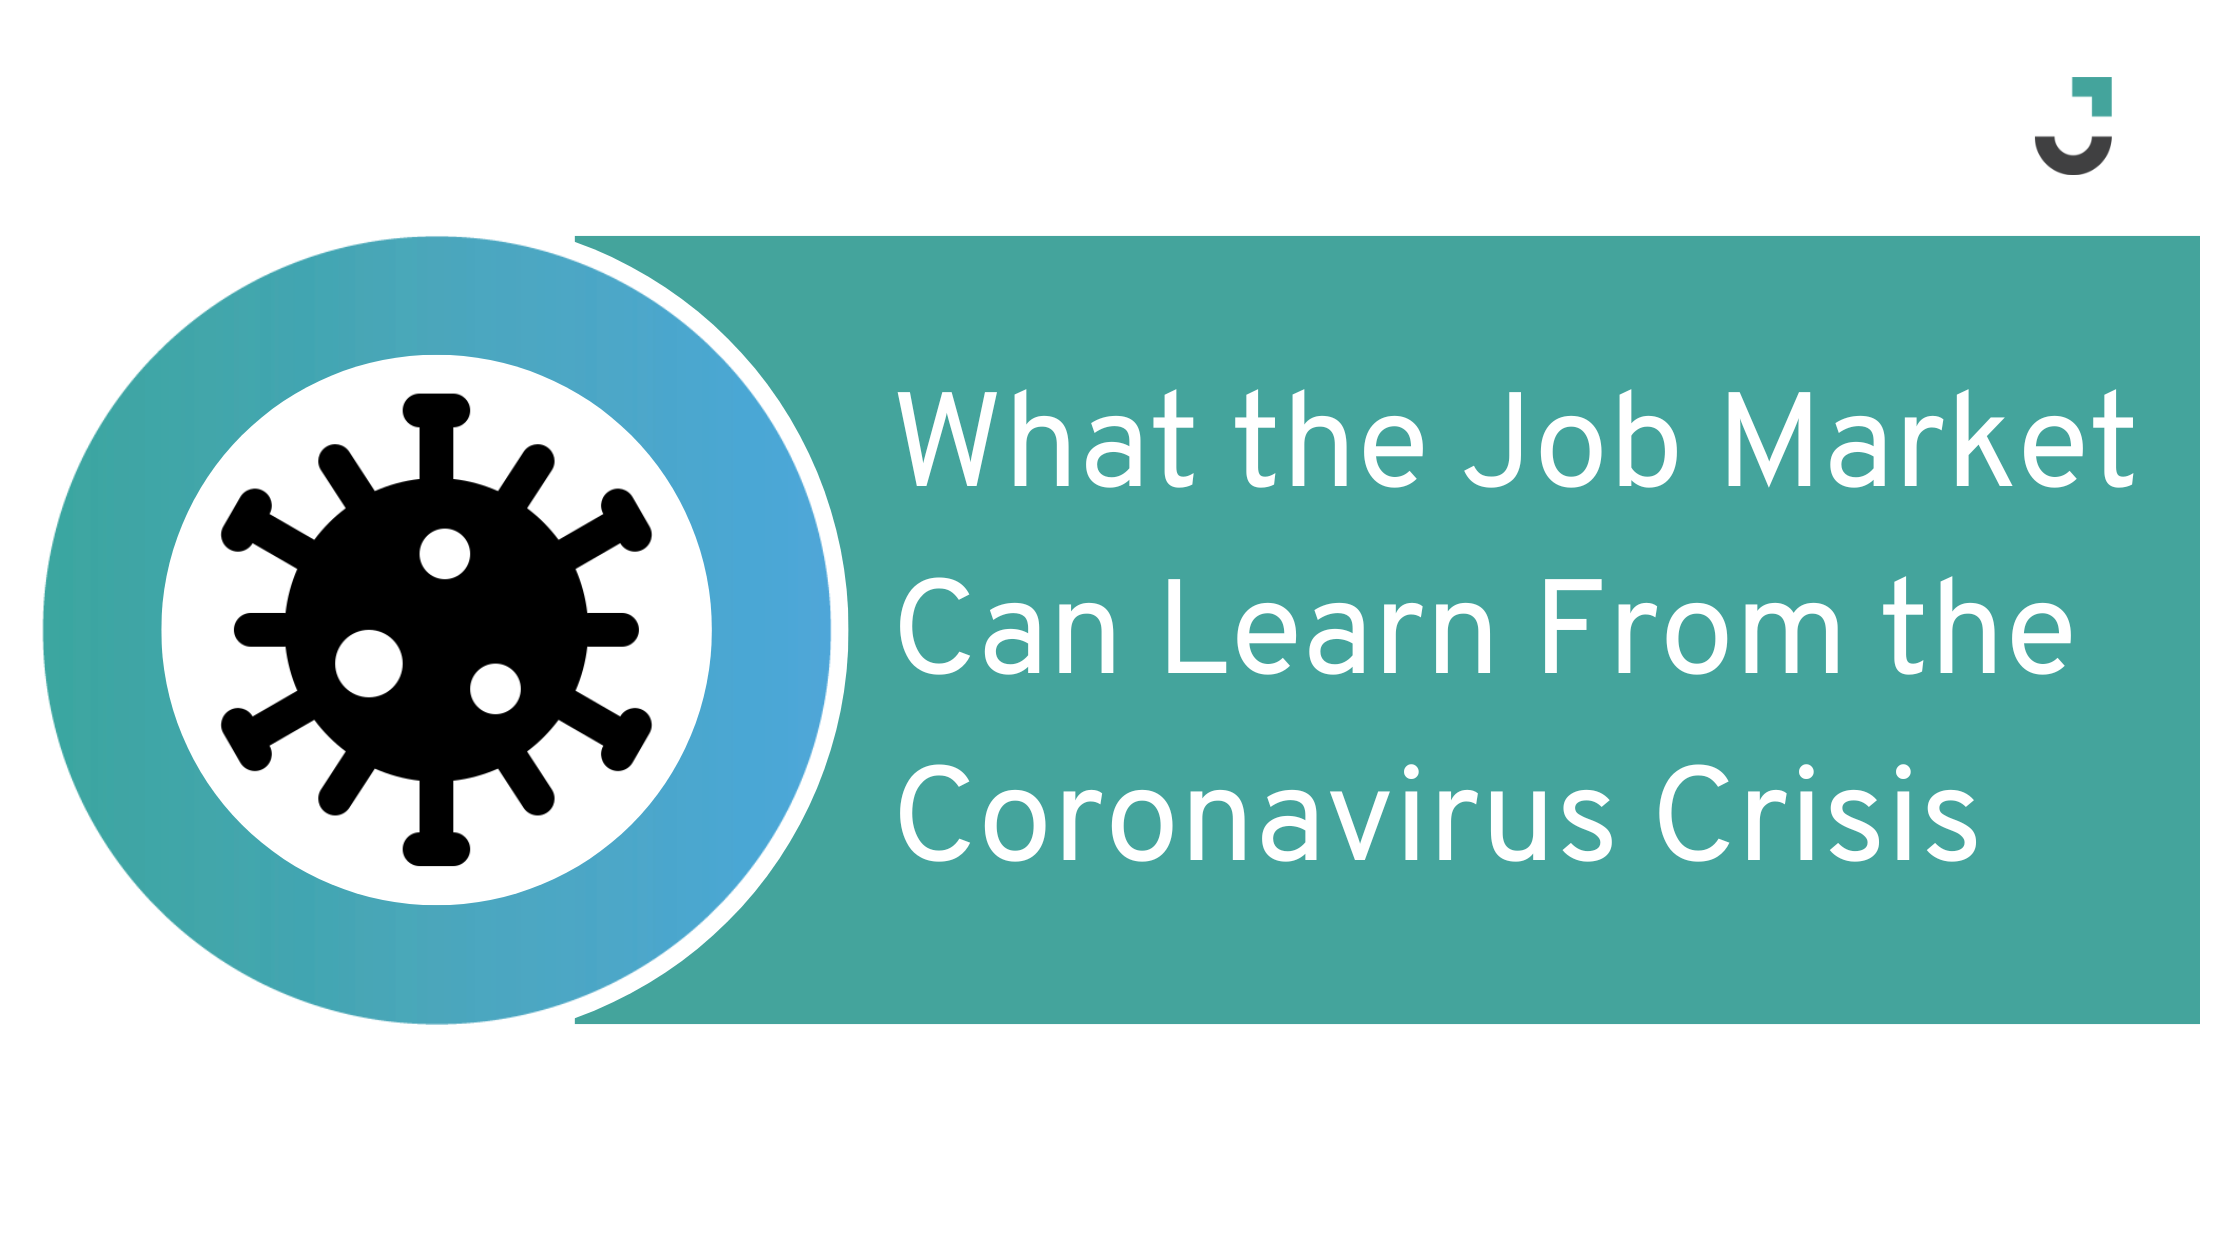 What the Job Market Can Learn From the Coronavirus Crisis